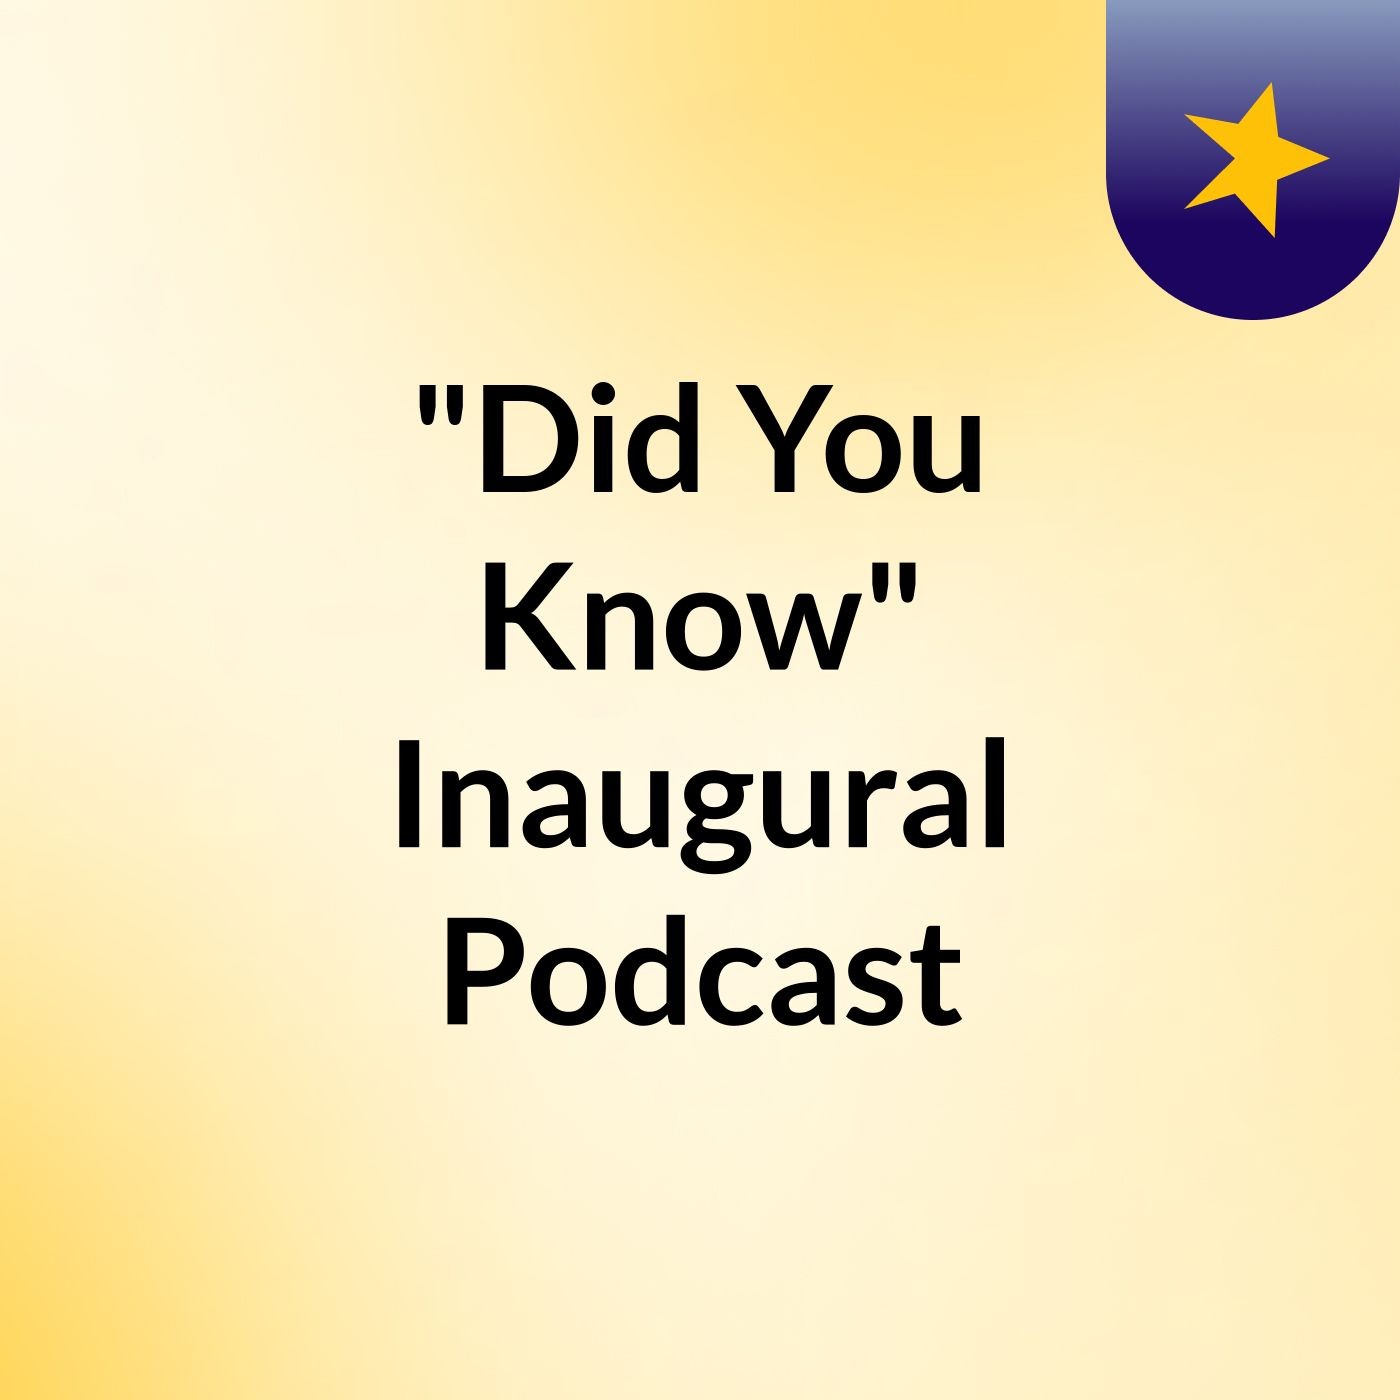 "Did You Know" Inaugural Podcast